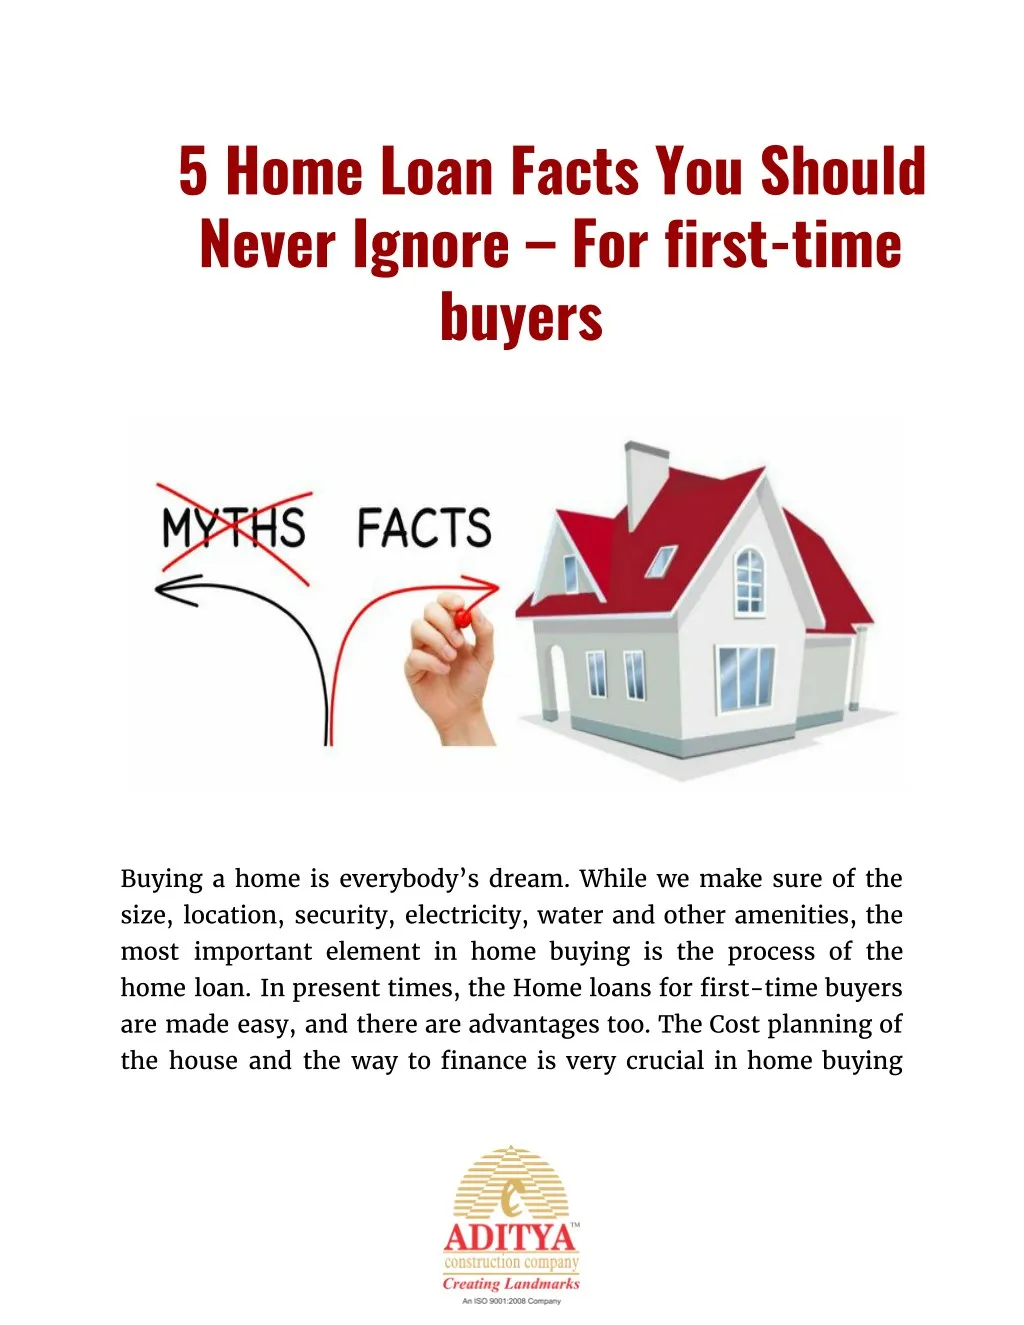 5 home loan facts you should never ignore